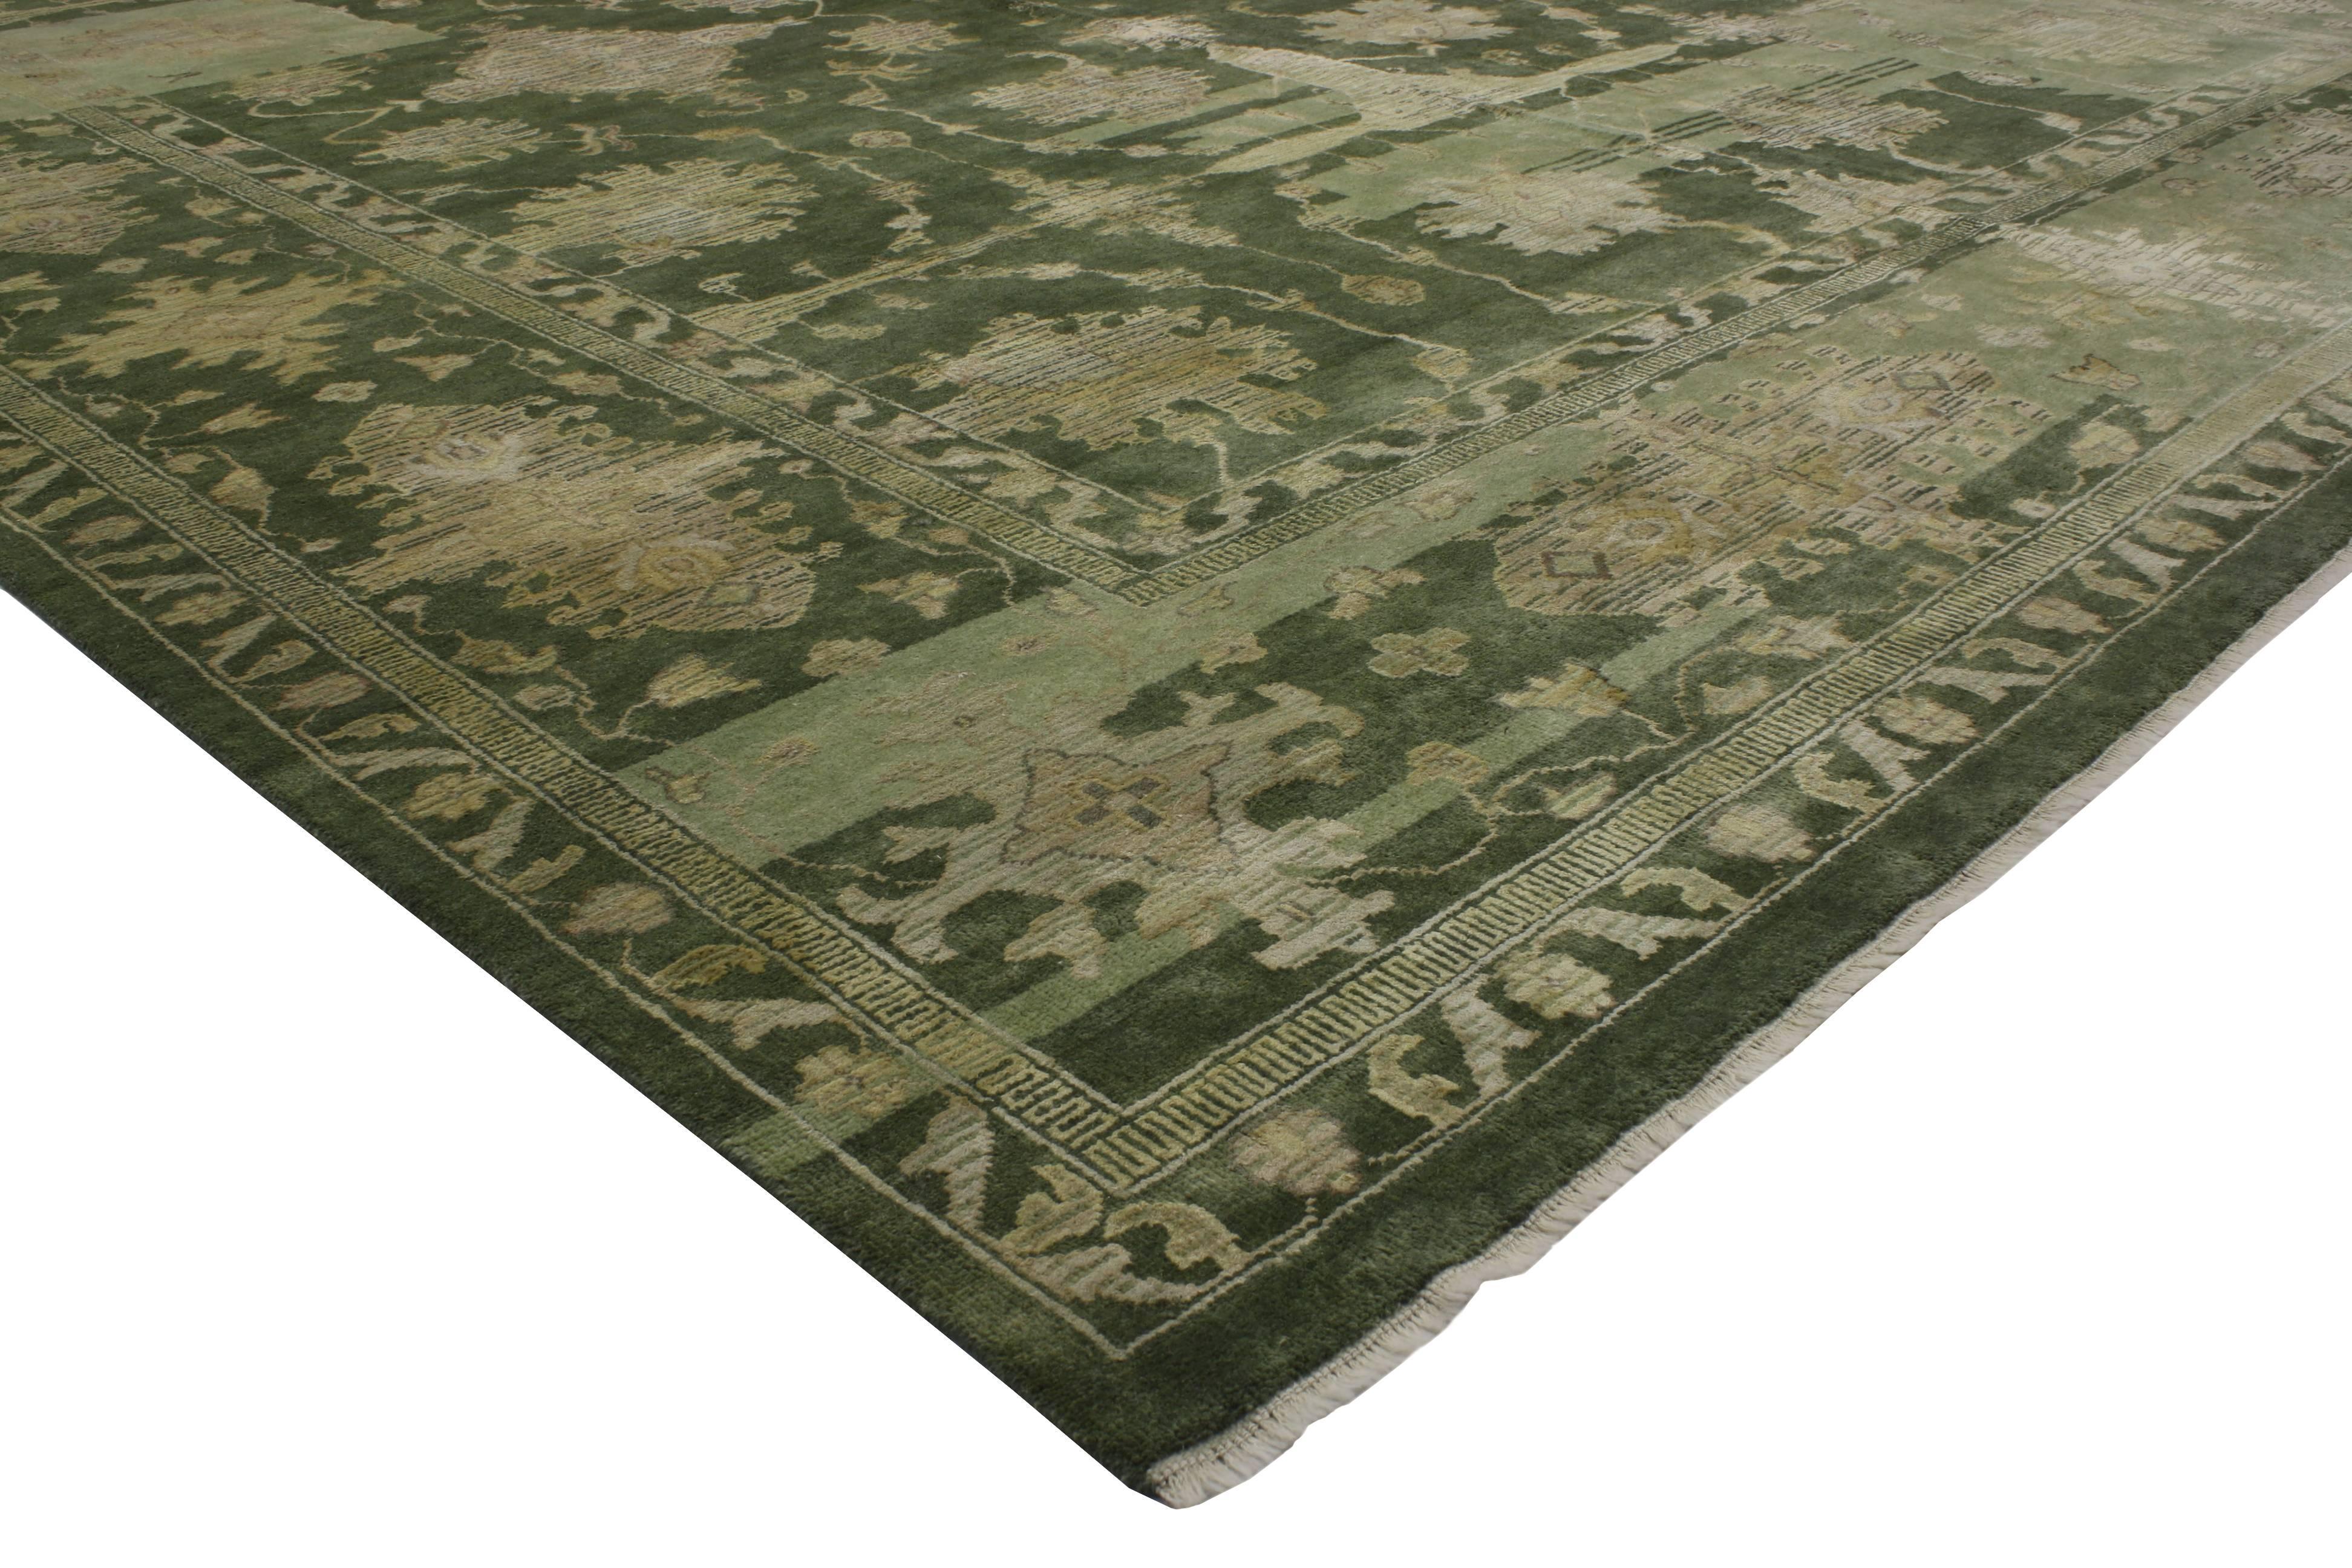 30316 New Transitional Area Rug with Modern Oushak Design, Green Oushak Style Rug. 30316 New Transitional Area Rug with Modern Oushak Design, 11'11 x 15'02. This hand-knotted wool transitional area rug features a modern Oushak design. The beauty